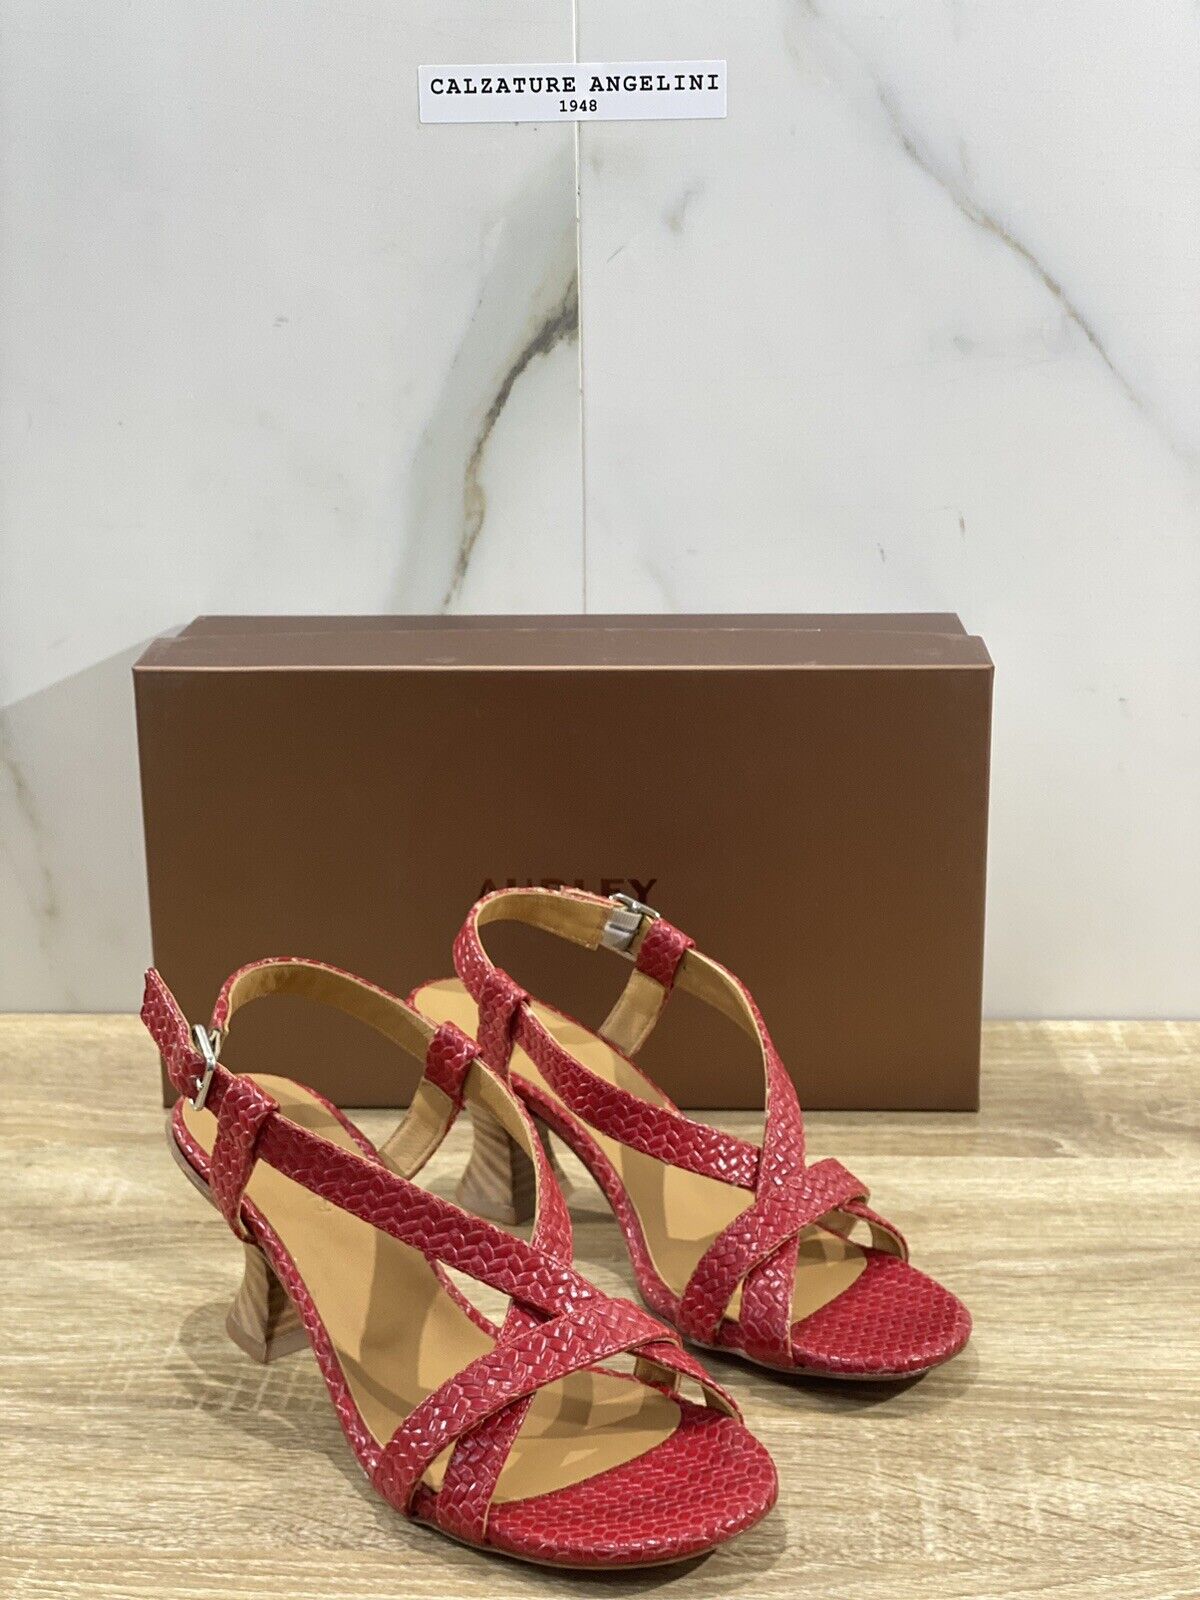 Audley London Sandalo Donna In Pelle Rossa Con Tacco 38